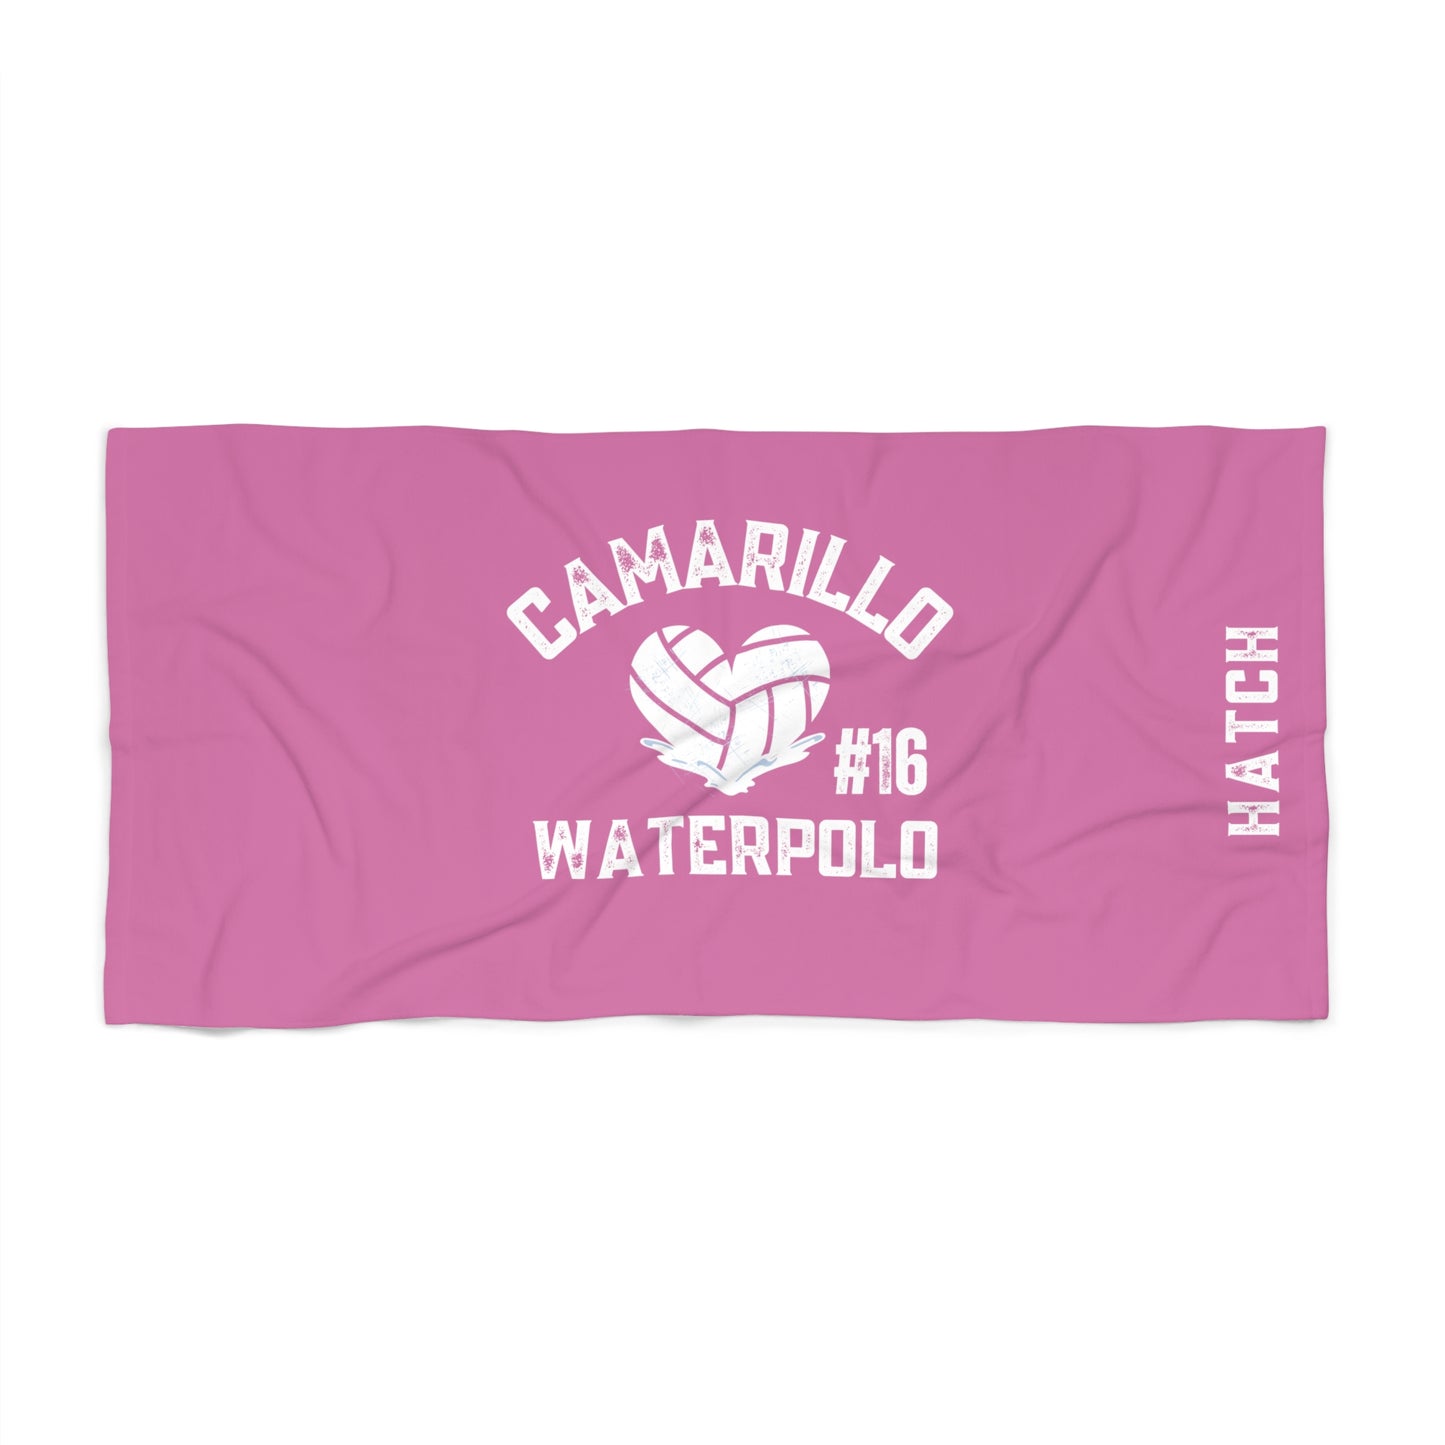 Camarillo Waterpolo Beach Towel  CUSTOMIZE - add athlete’s name & # in notes